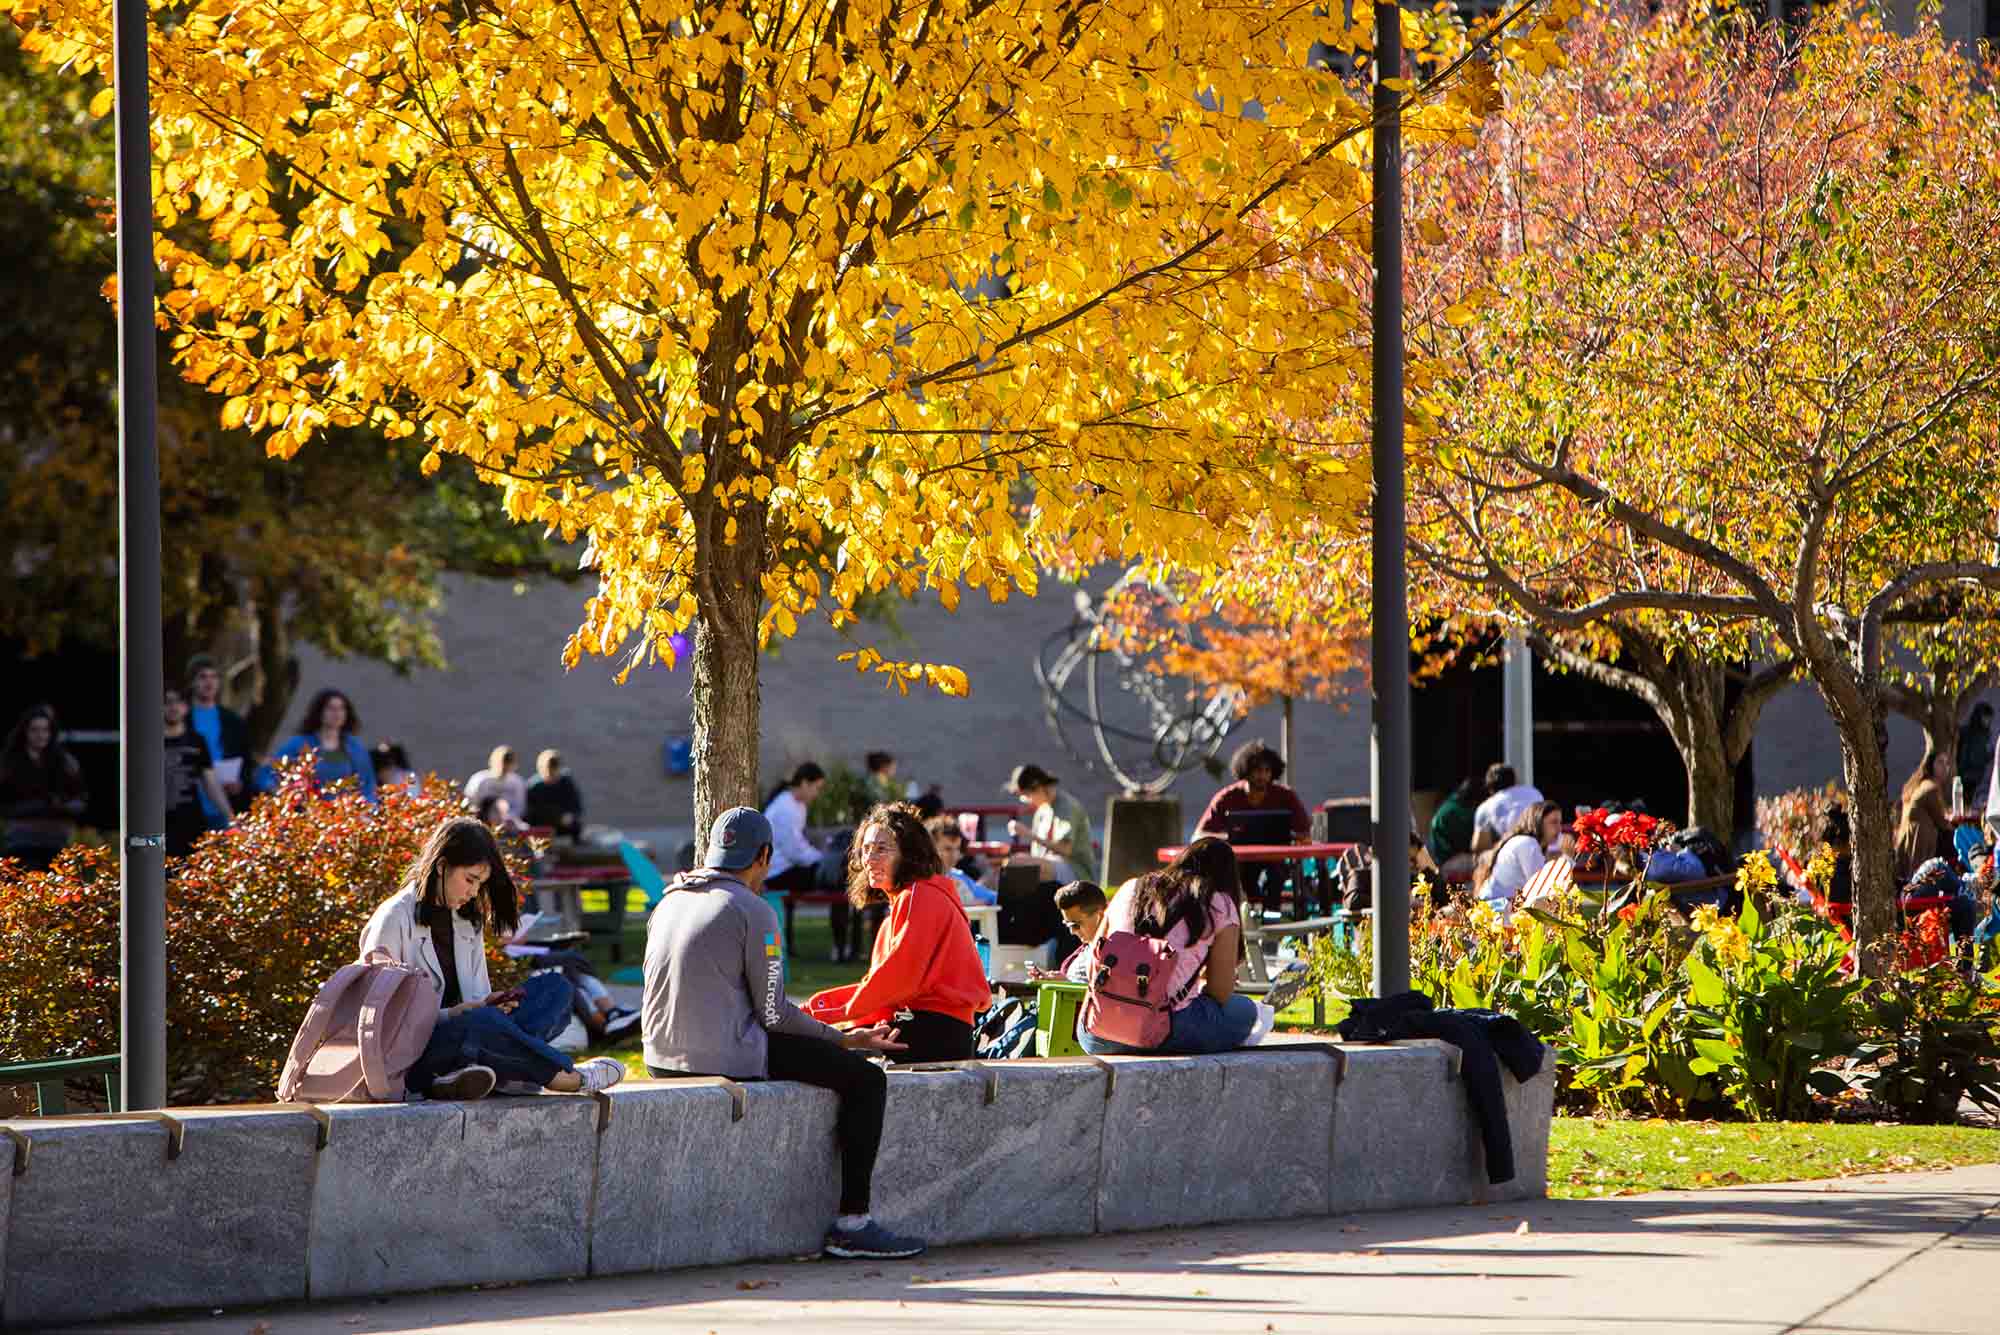 Photo: Large trees with orange, yellow, and red leaves frame students on BU's campus as they sit and chat on and around a campus lawn on a sunny, warm autumn day in Boston.